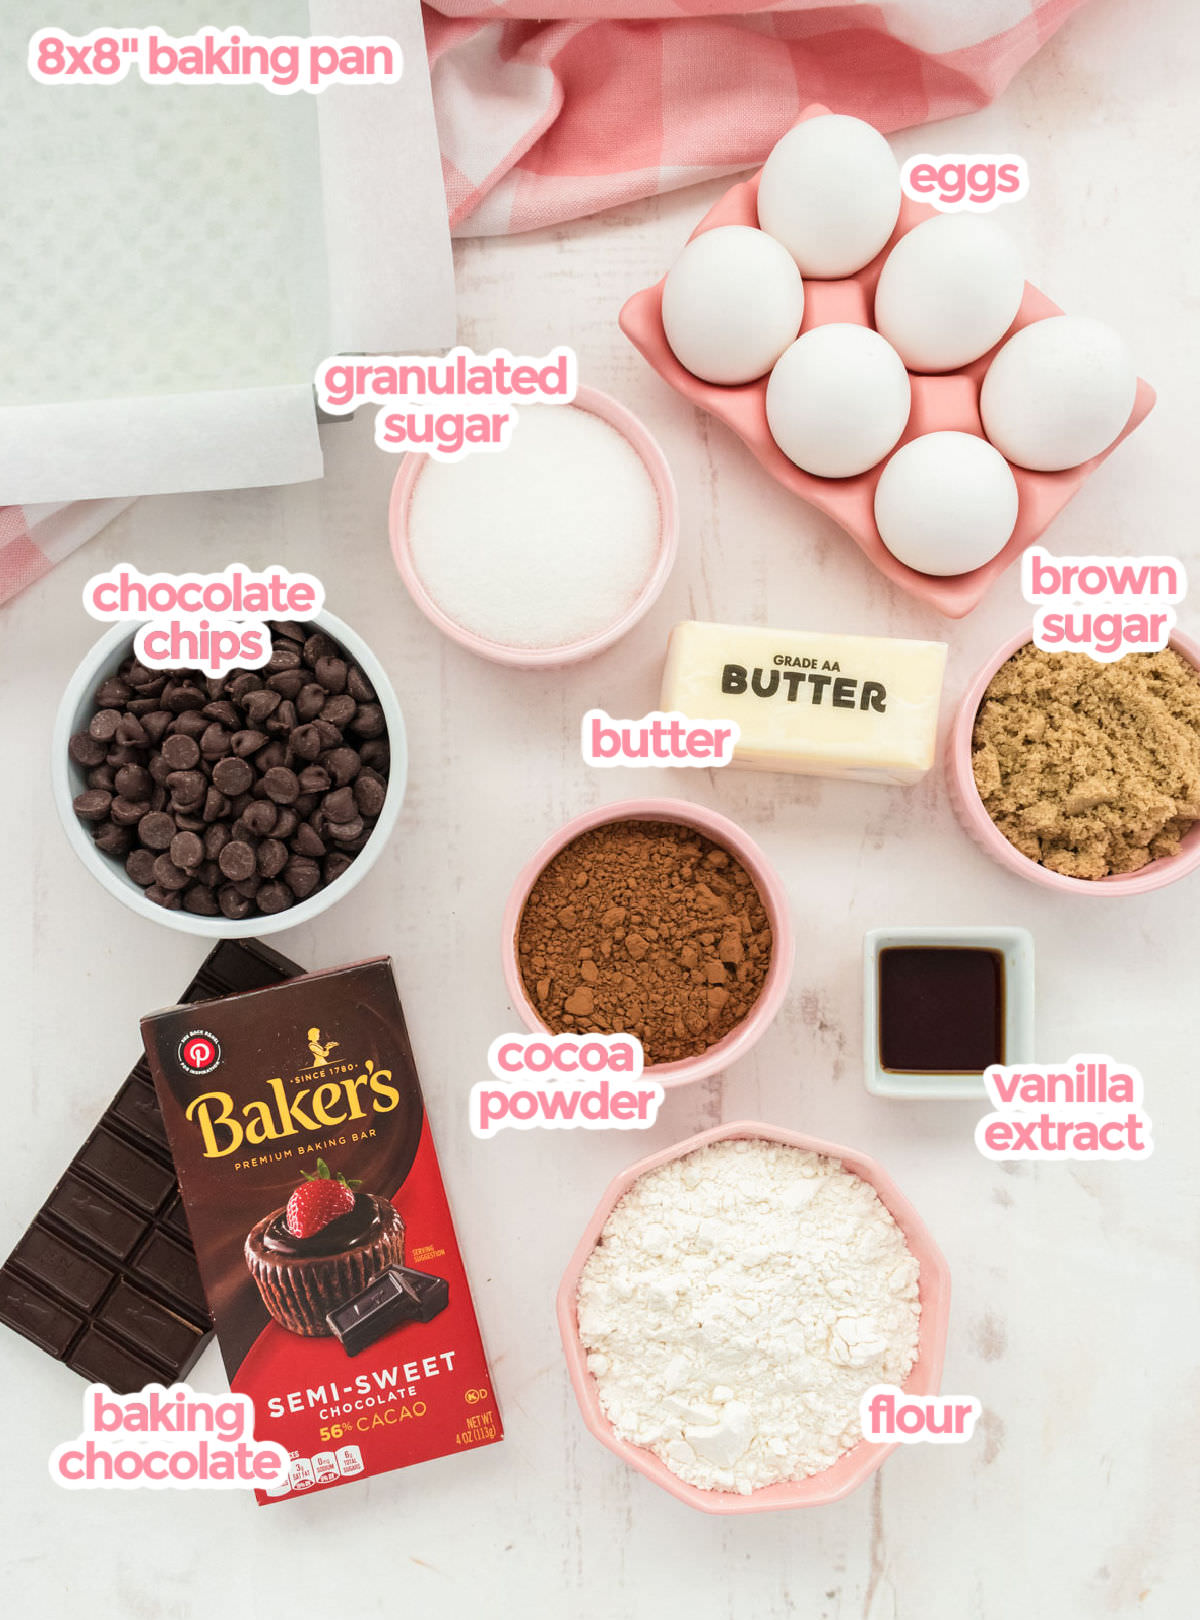 All the ingredients needed to make Homemade Fudge Brownies including eggs, sugar, chocolate bar, cocoa powder, chocolate chips, butter, vanilla and flour.